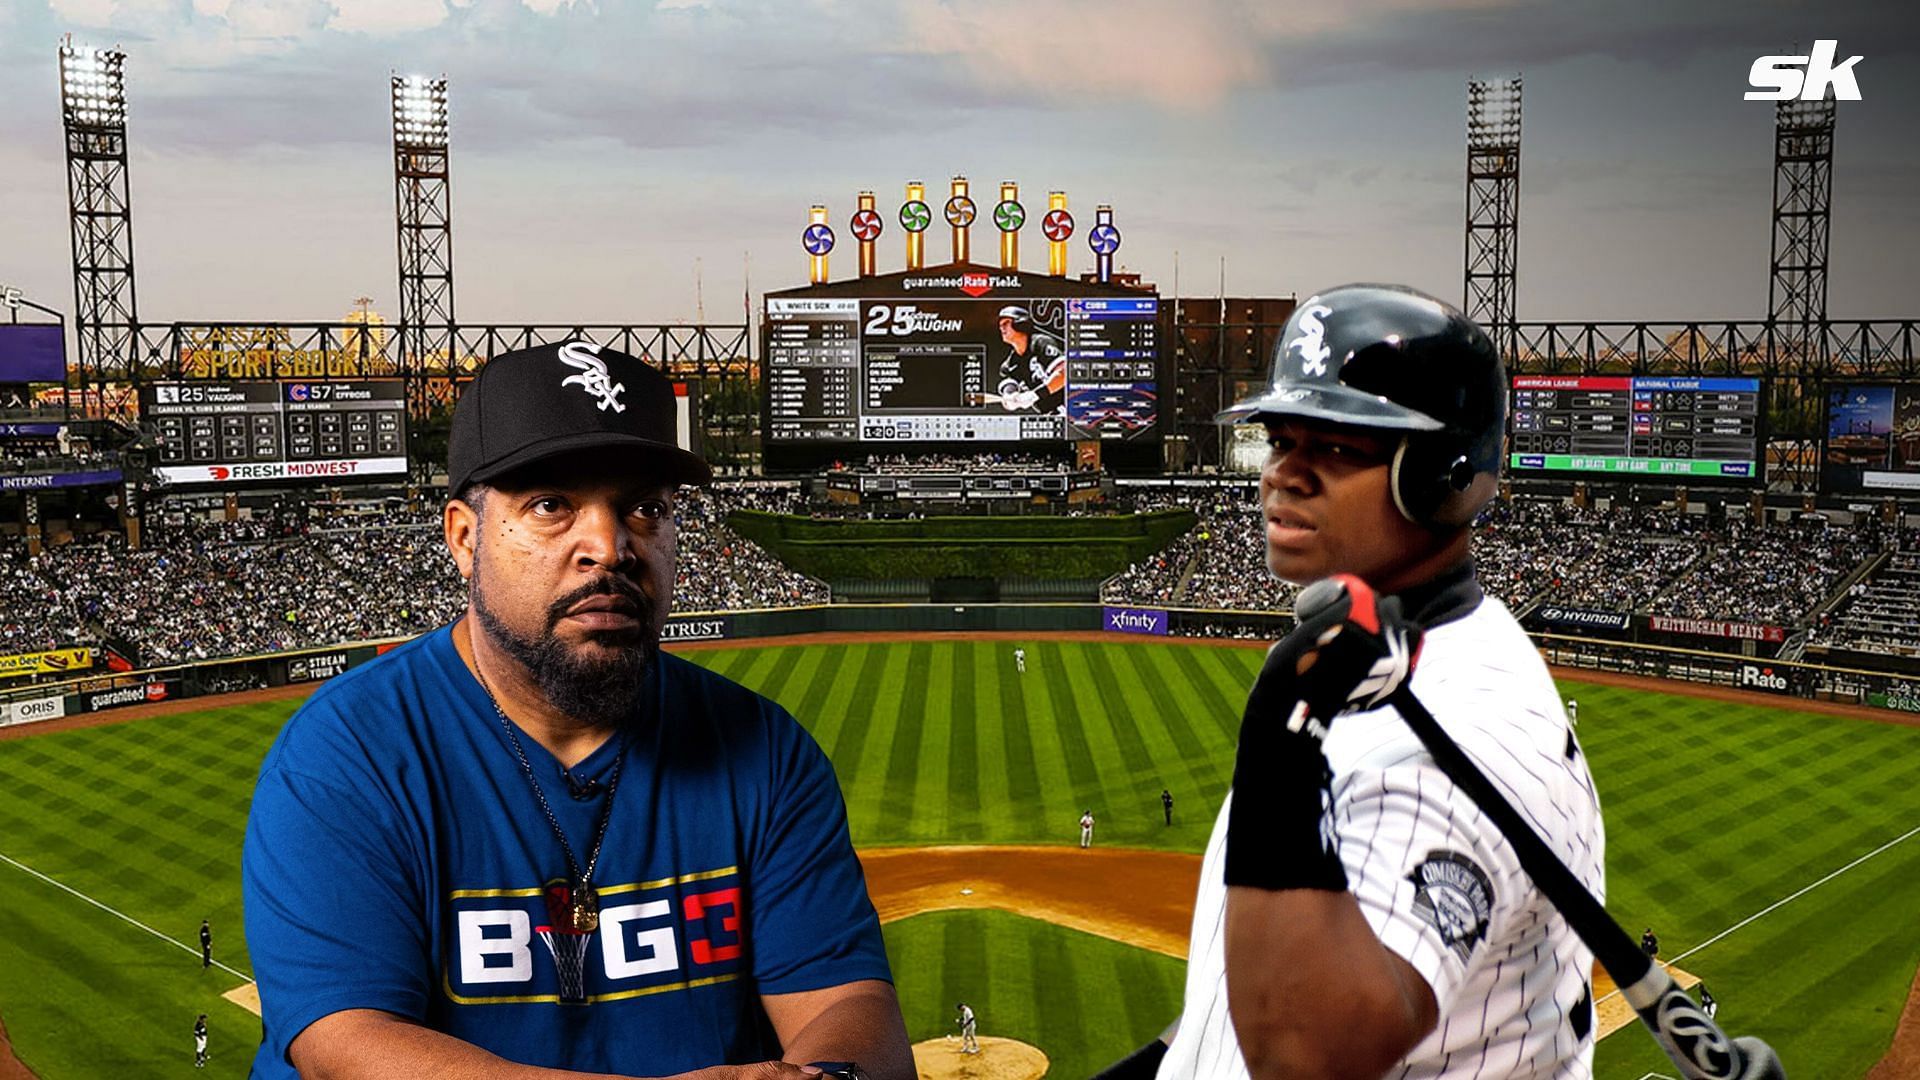 Ice Cube White Sox Hat: Fact Check: Did legendary rapper Ice Cube  popularize the White Sox hat? Exploring history of musician's iconic look